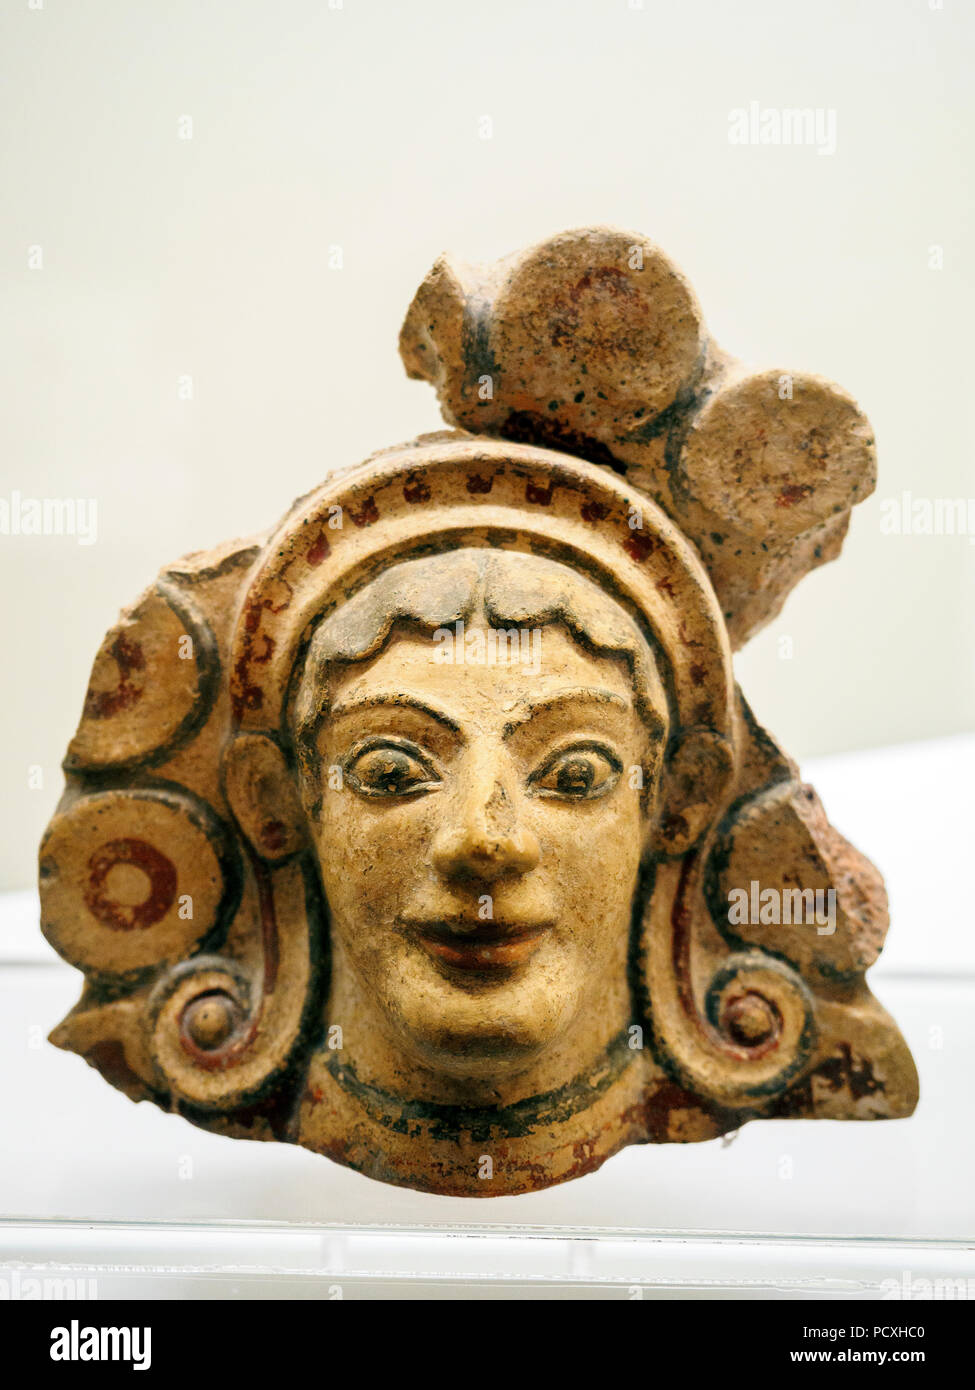 Antefixes with head of Maenad within a crown of rosettes or disks from the Sanctuary of the Acropolis of Vignale (5th-2nd century BC) - National Etruscan Museum of Villa Giulia - Rome, Italy Stock Photo